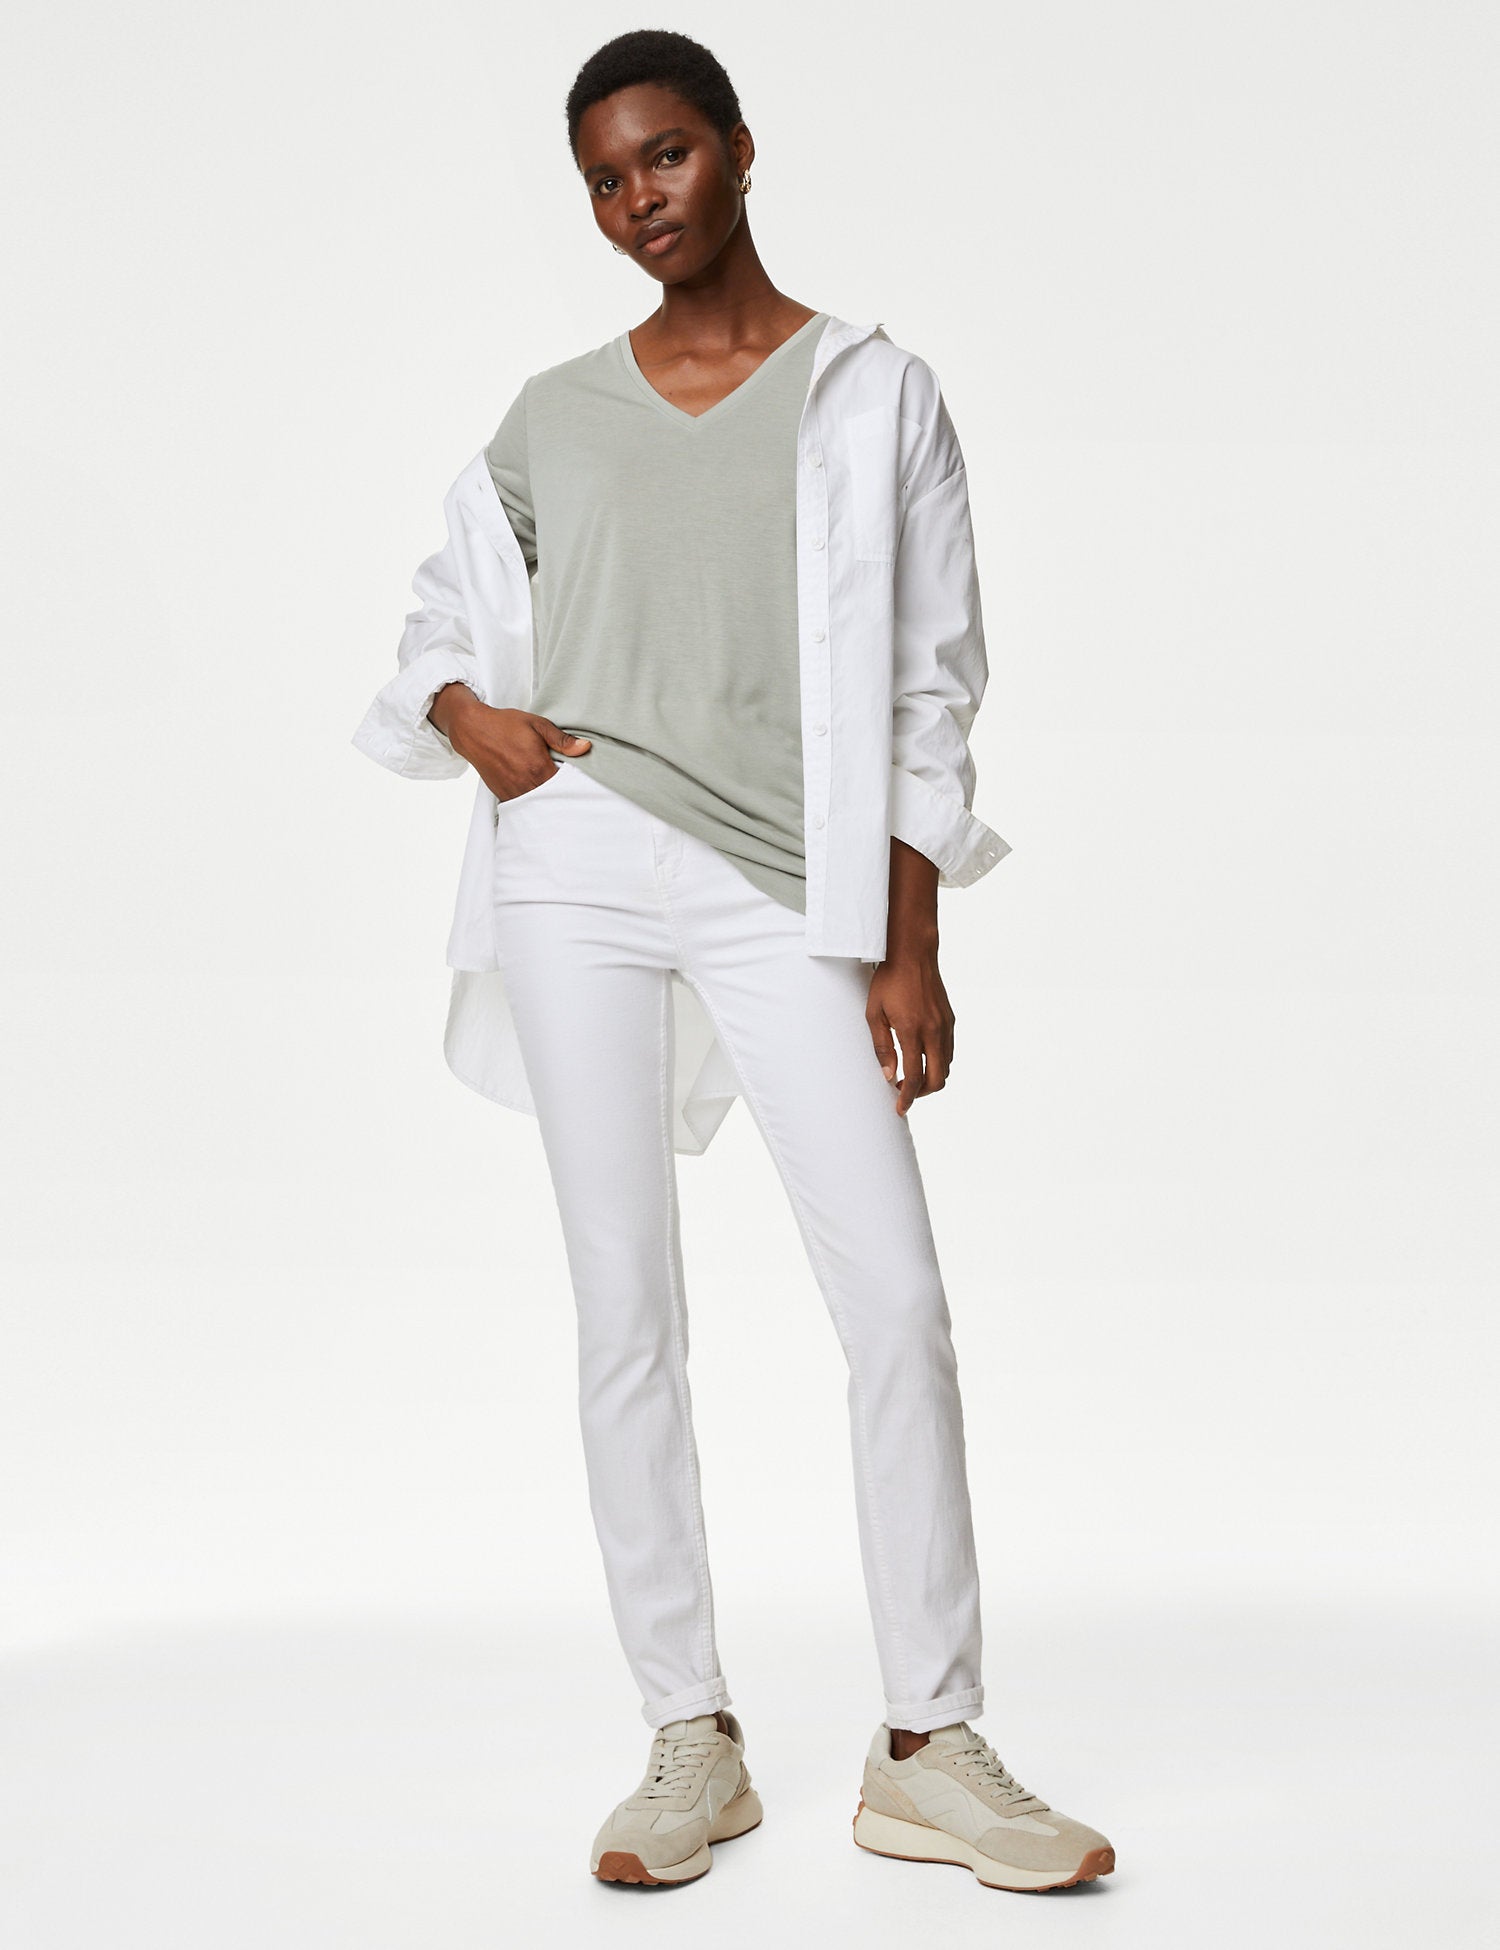 Relaxed Longline Top